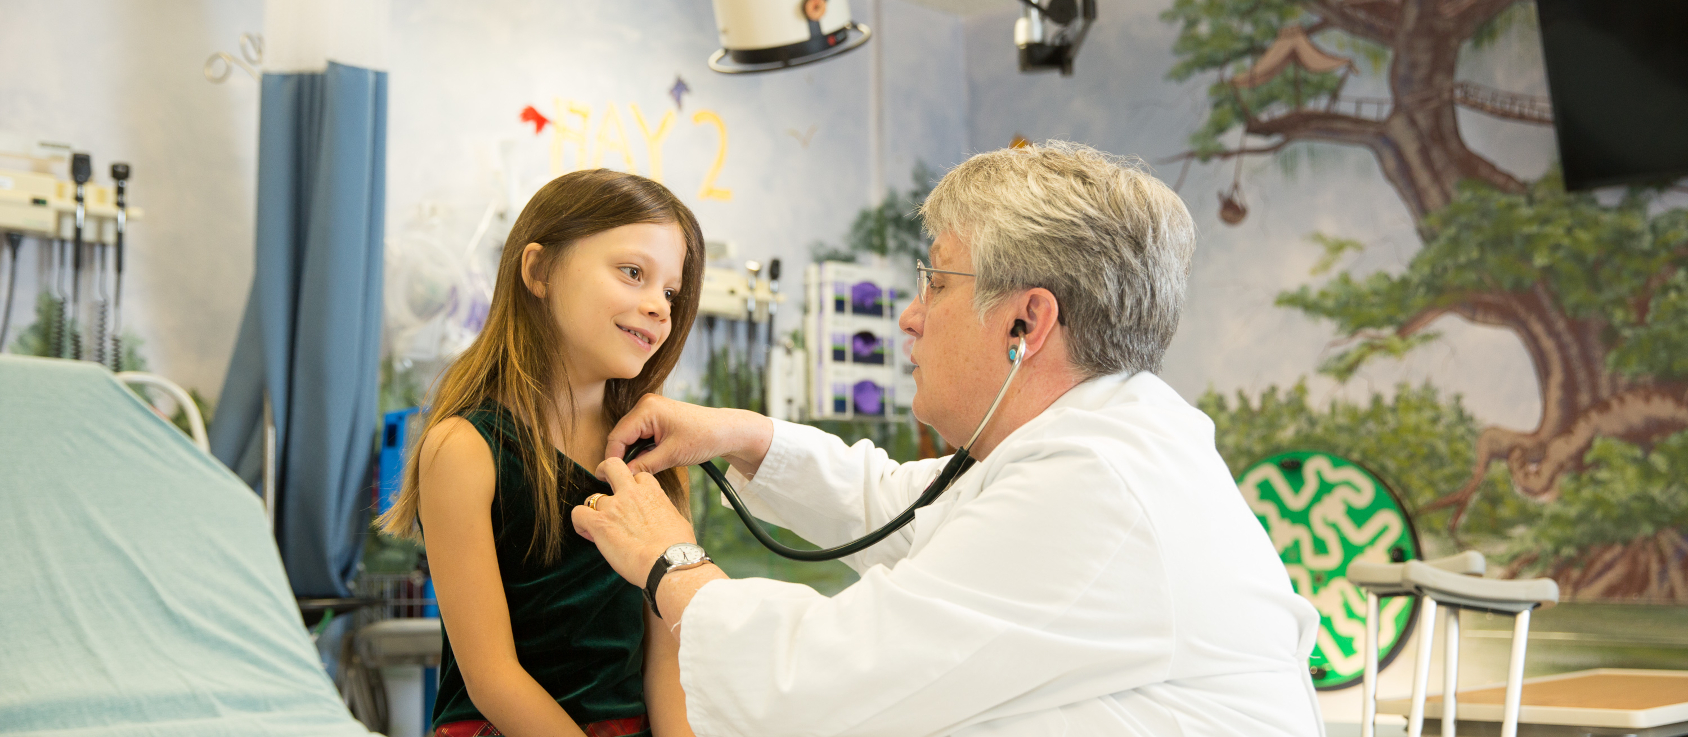 A pediatric doctor examining a patient with a stethoscope